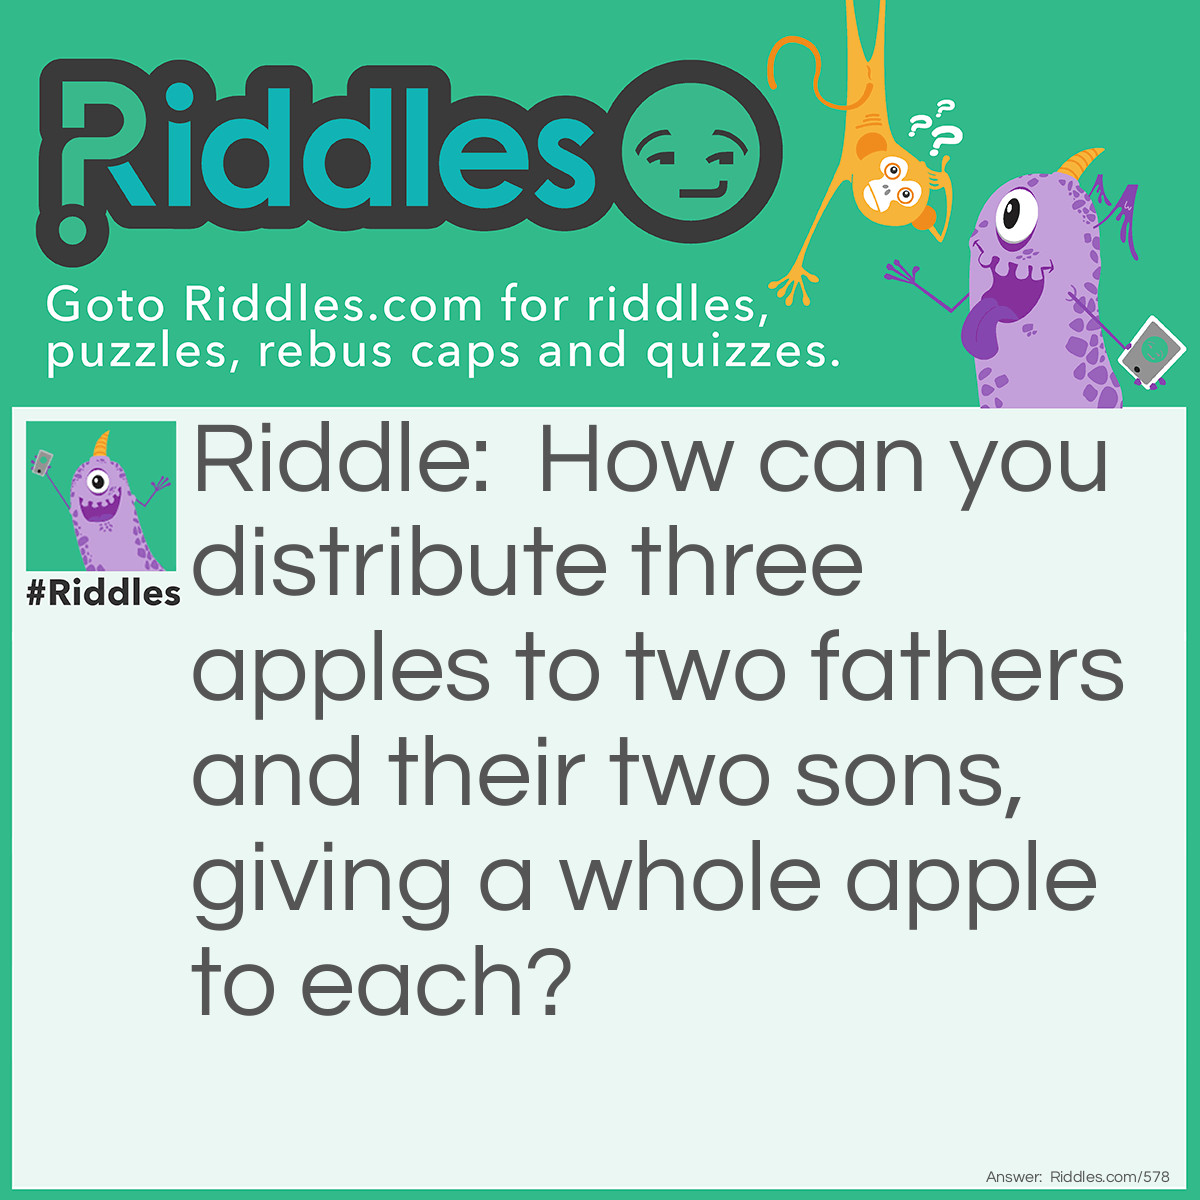 Riddle: How can you distribute three apples to two fathers and their two sons, giving a whole apple to each? Answer: They are Grandfather - Father - Son. The middle is a father and a son at the same time!